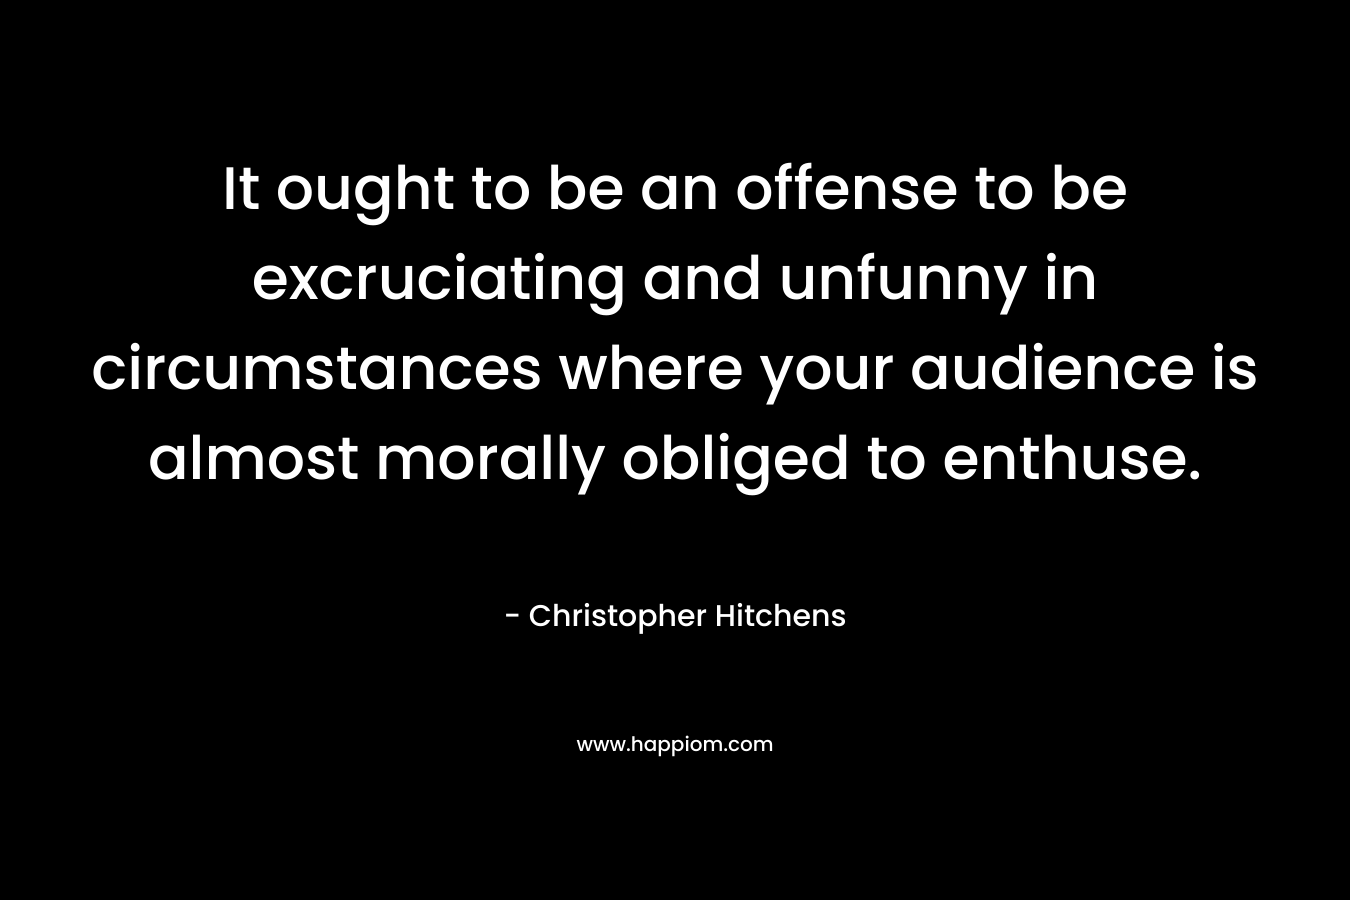 It ought to be an offense to be excruciating and unfunny in circumstances where your audience is almost morally obliged to enthuse. – Christopher Hitchens